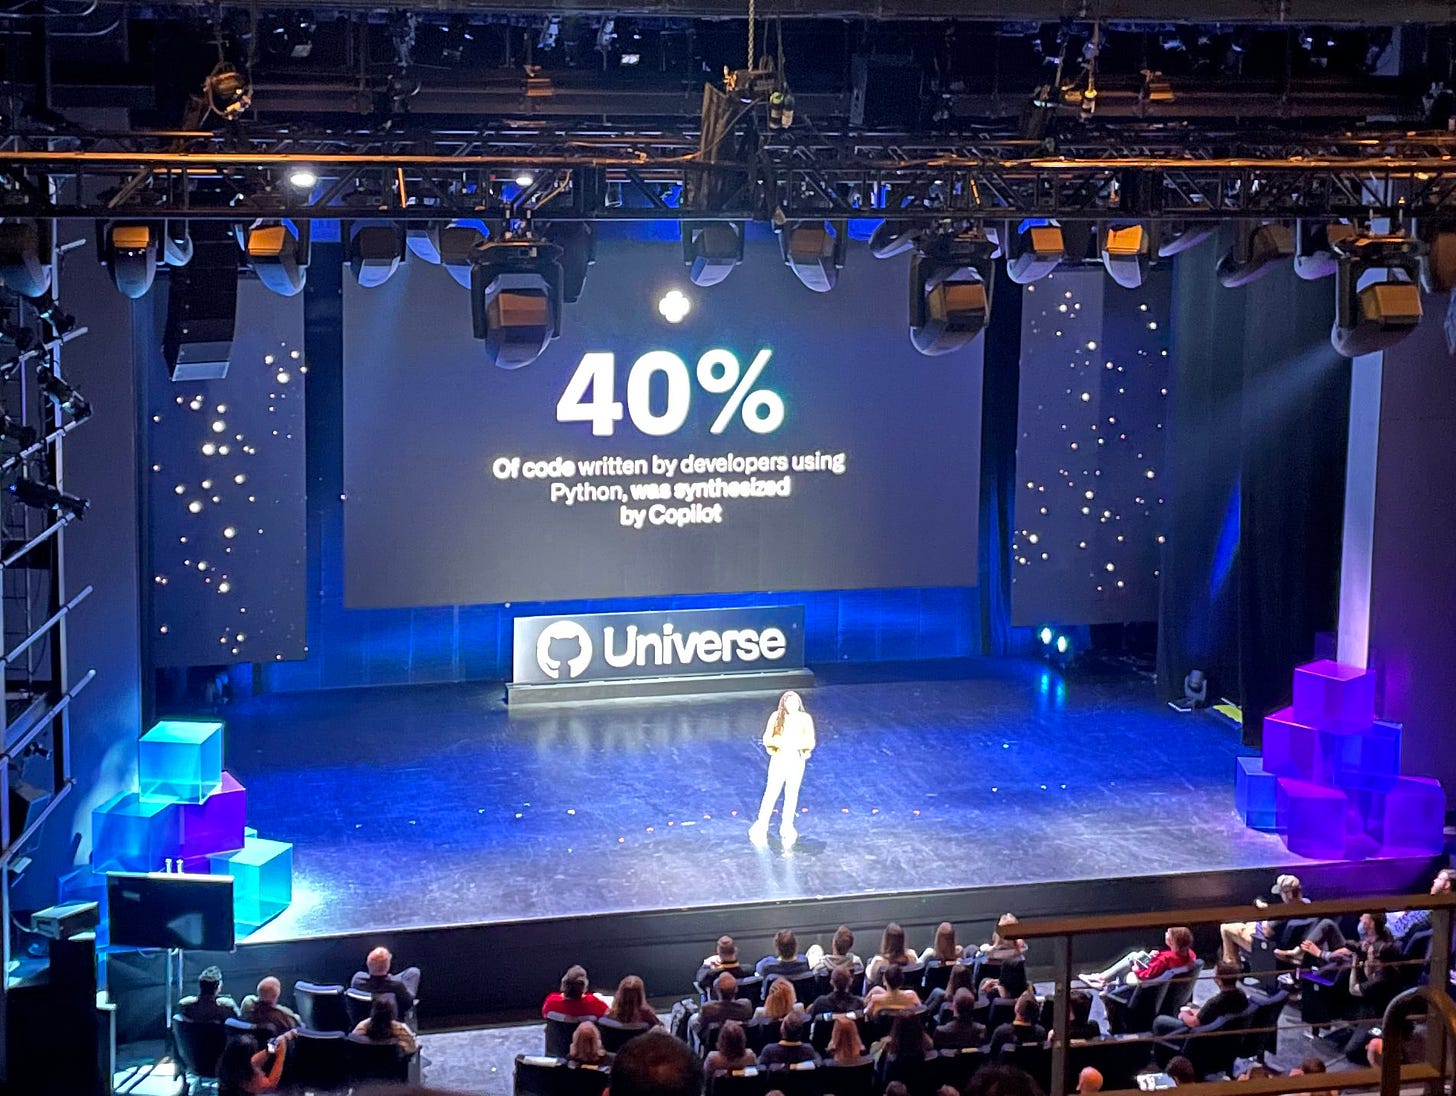 Photo of GitHub Universe keynote showing a slide that says “40% of code written by developers using Python was synthesized by Copilot”